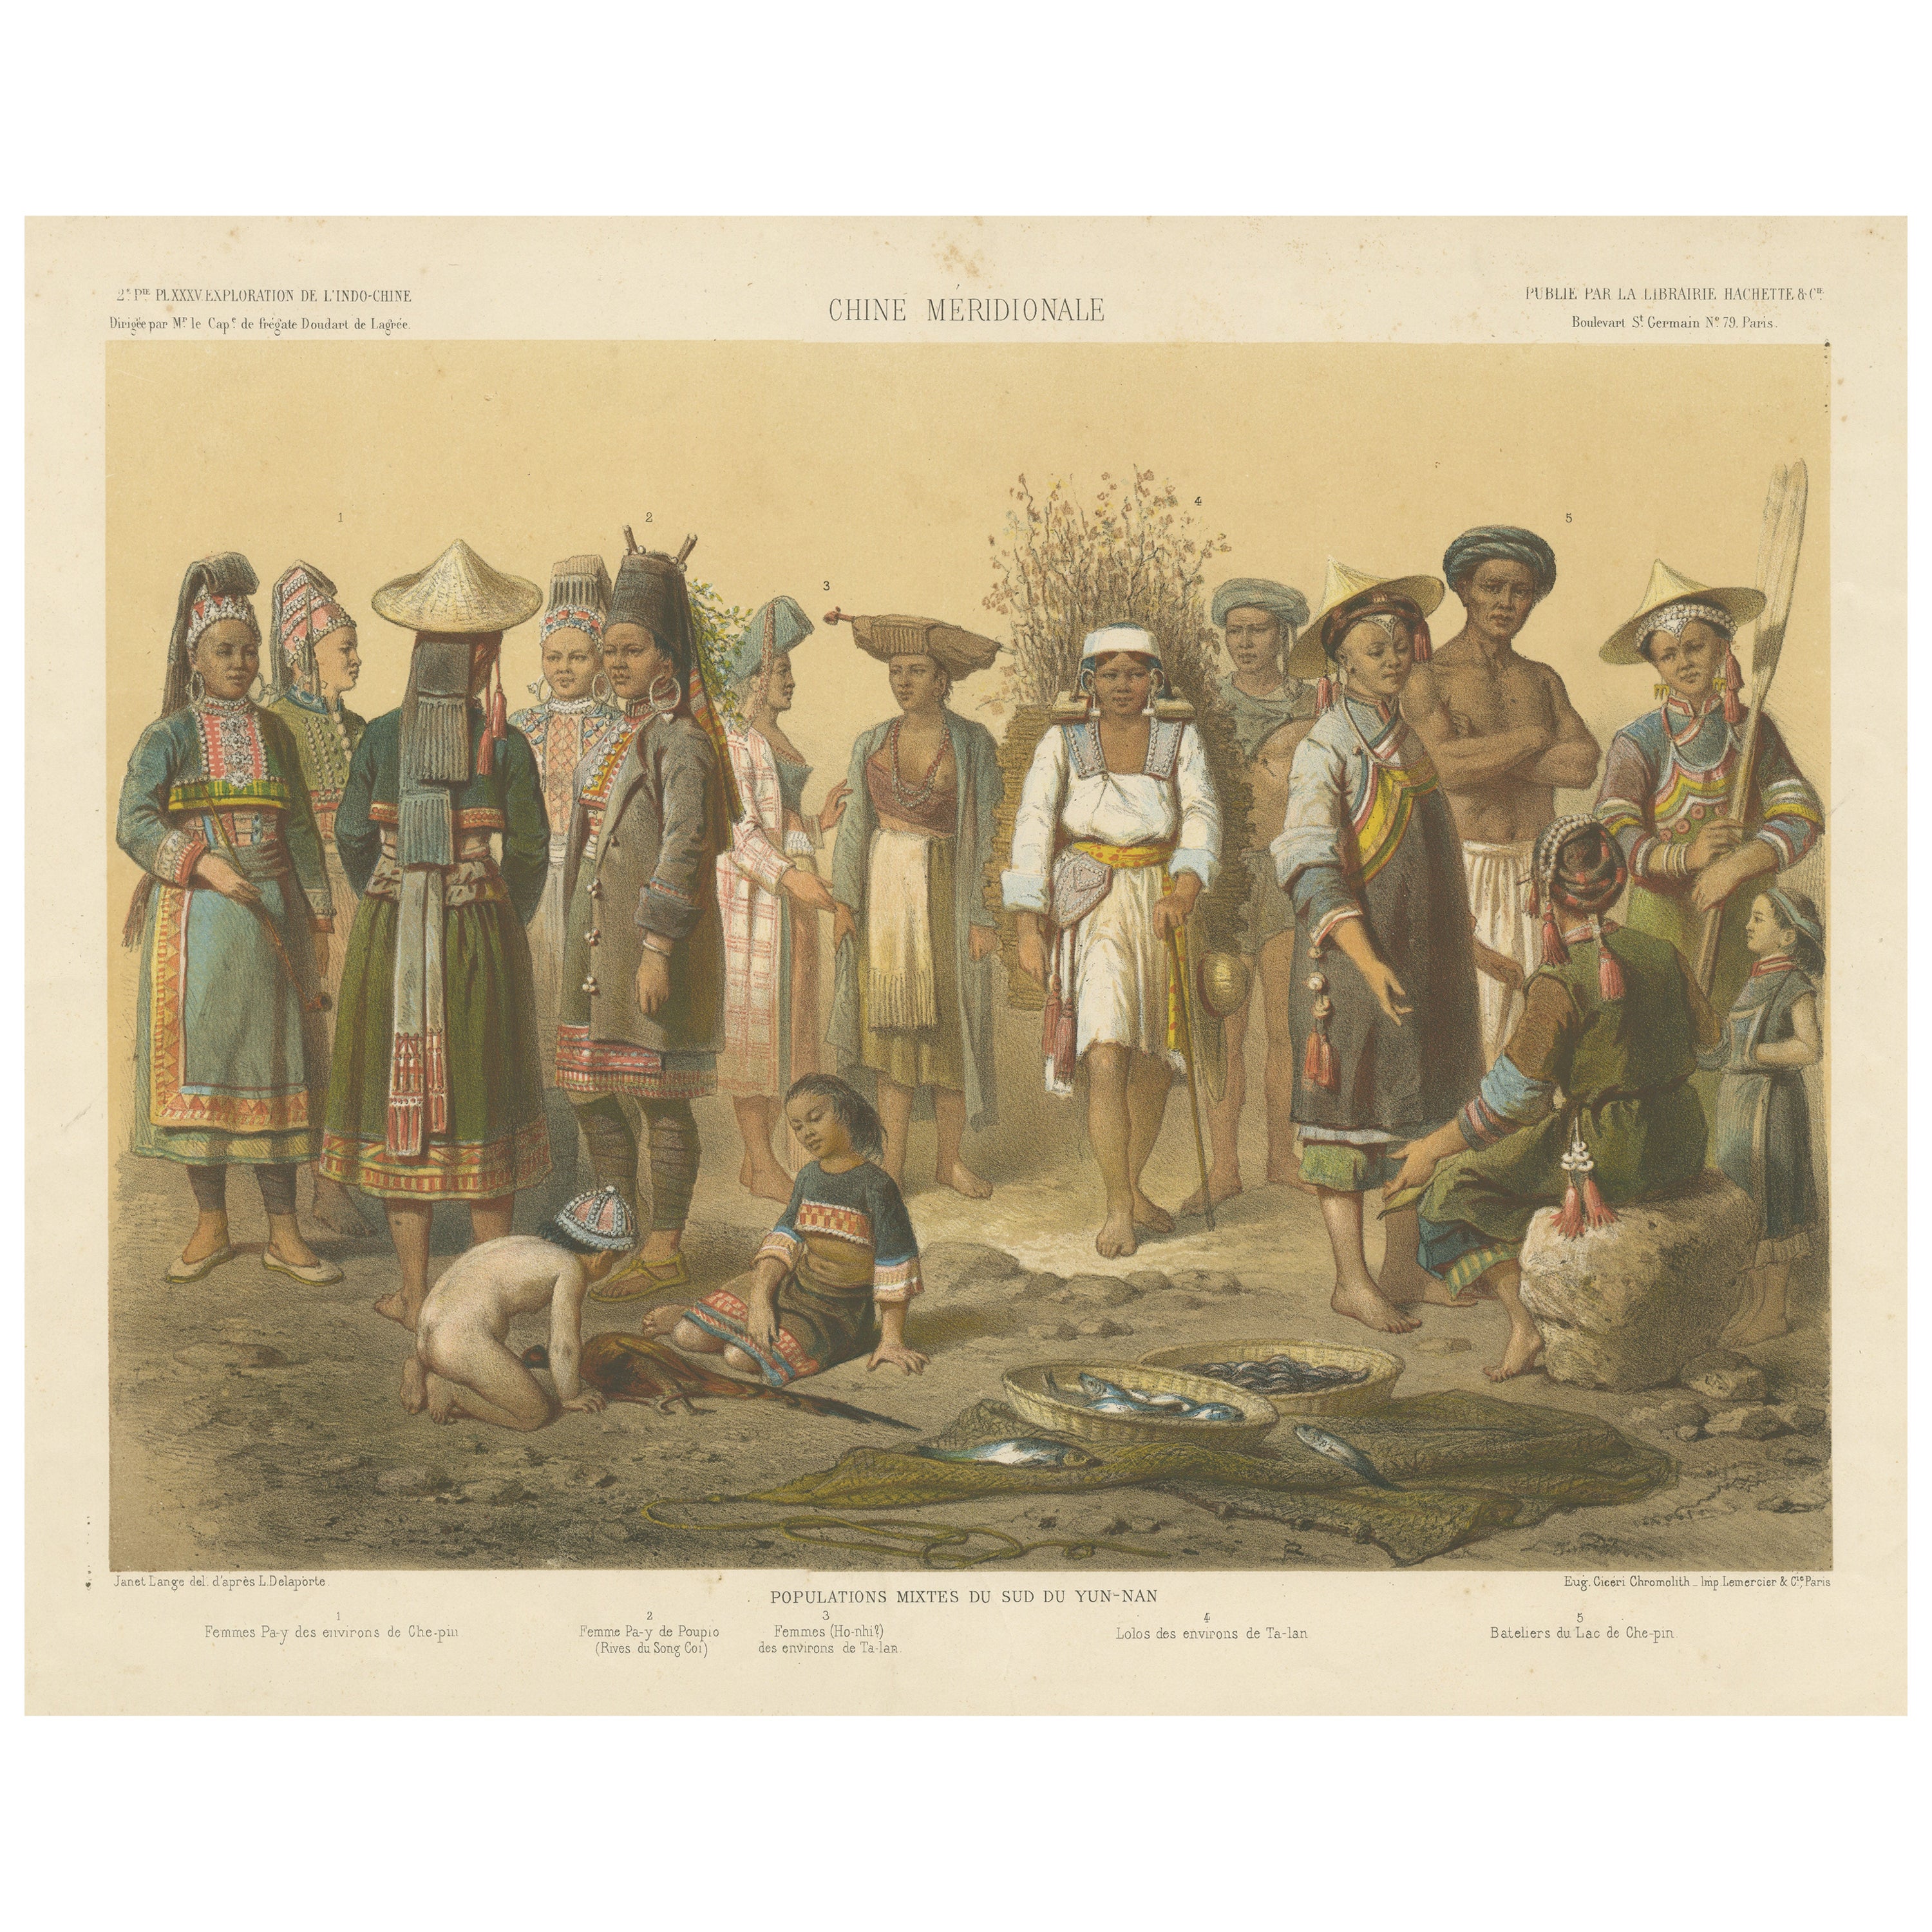 Large Antique Print with mixed populations of Yunnan, southwestern China For Sale